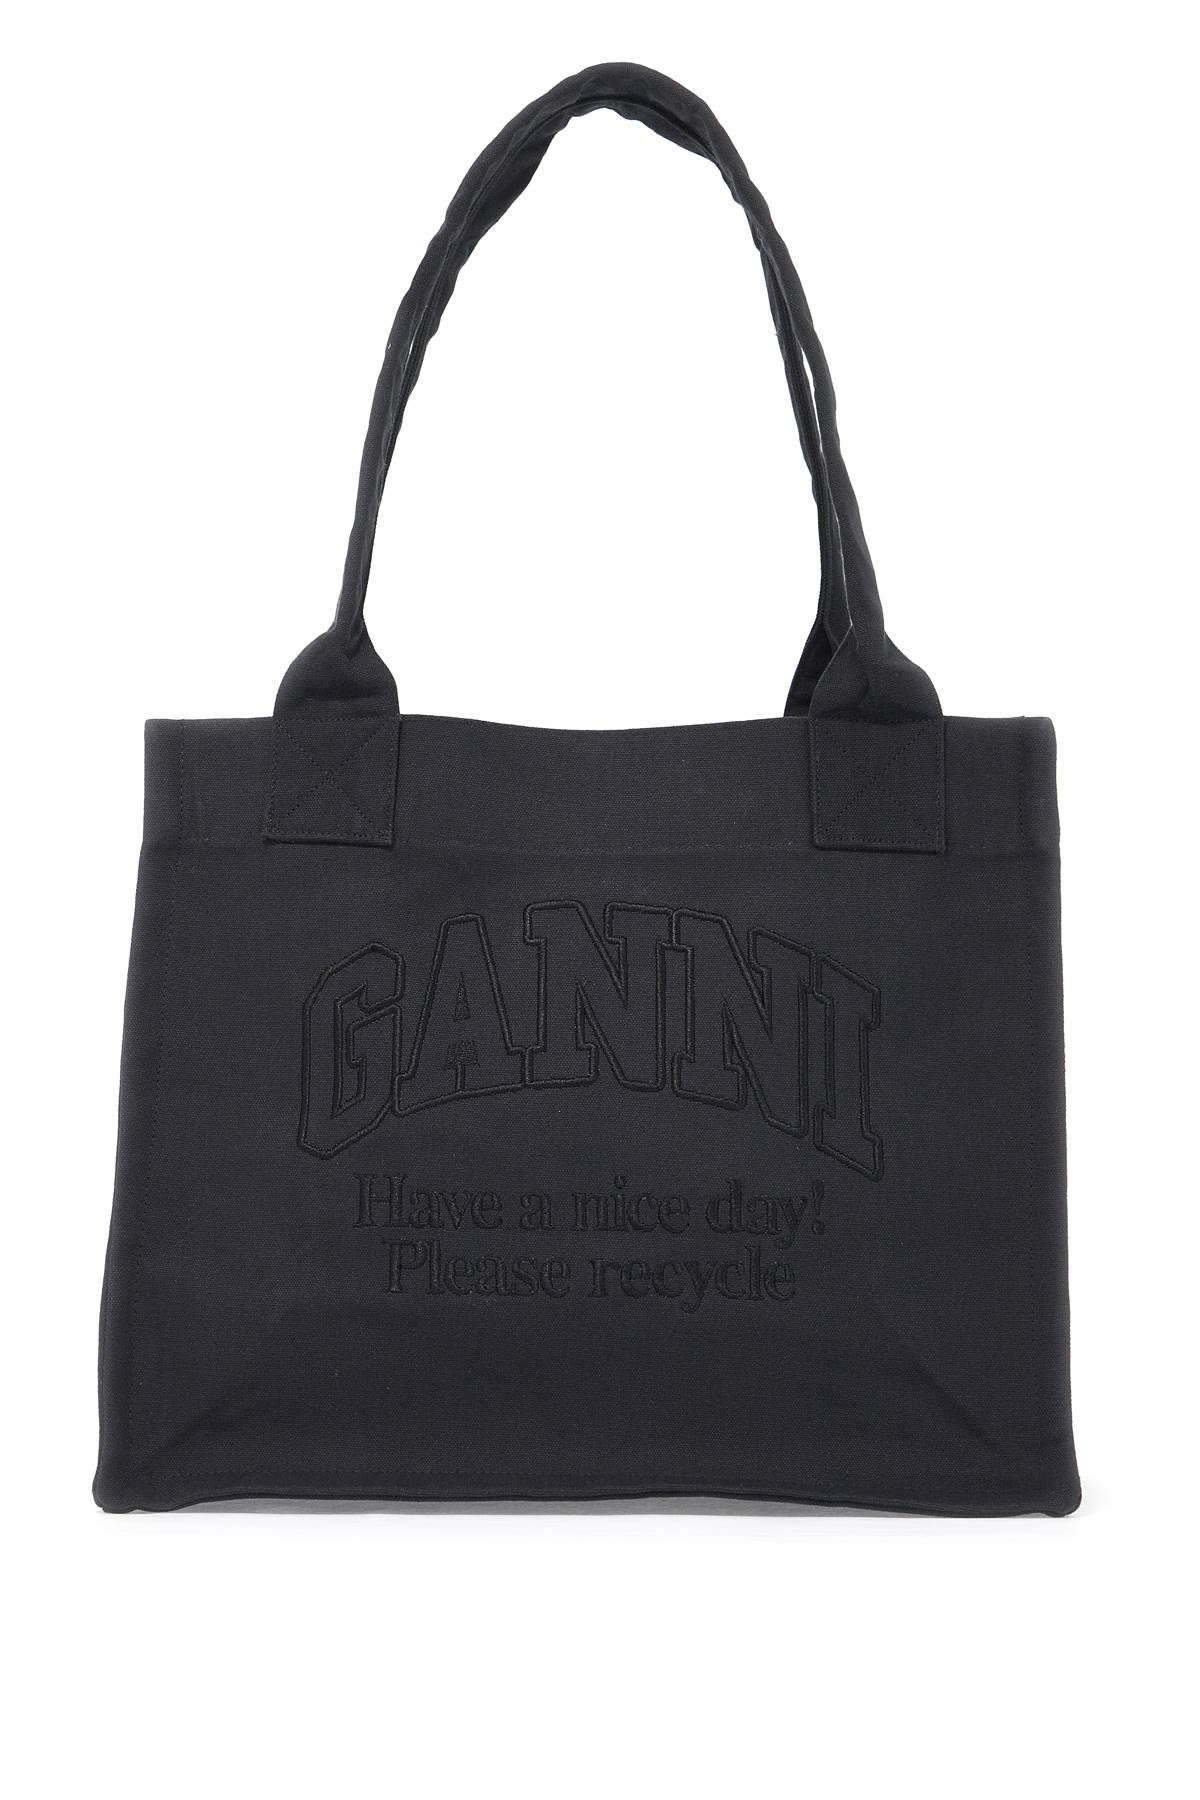 Ganni GANNI recycled cotton tote bag in